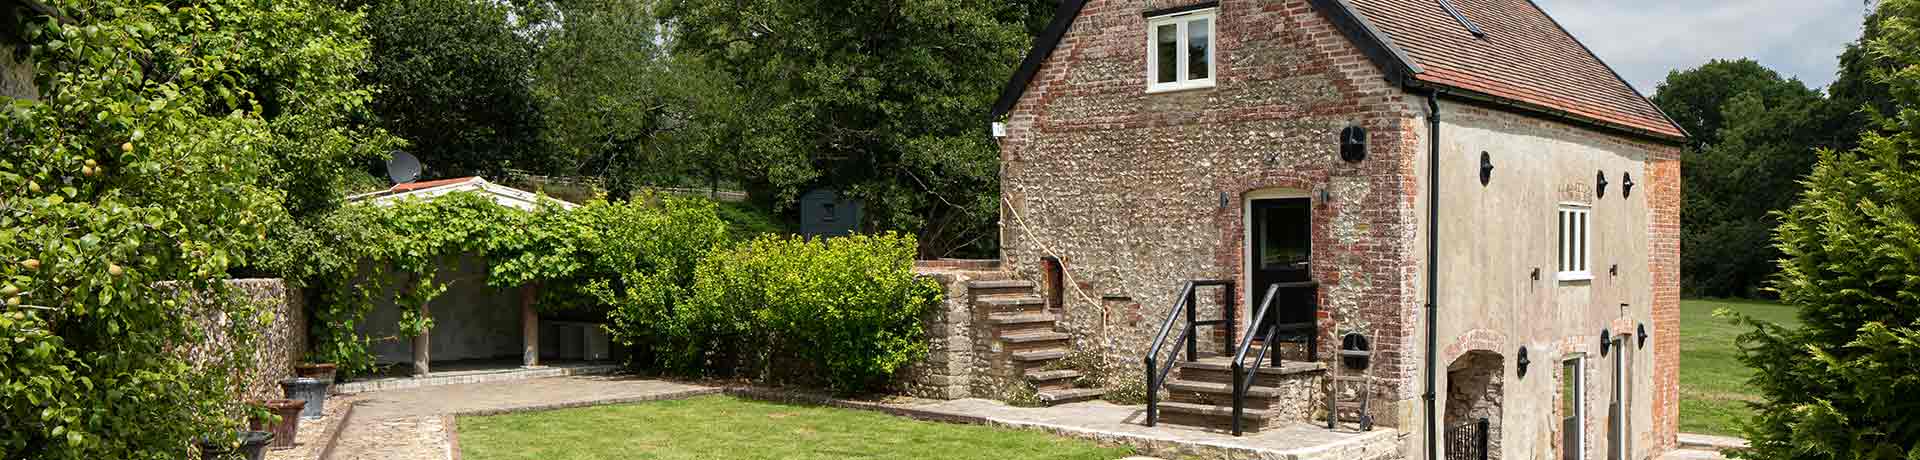 Cottages for 4 people in The Cotswolds